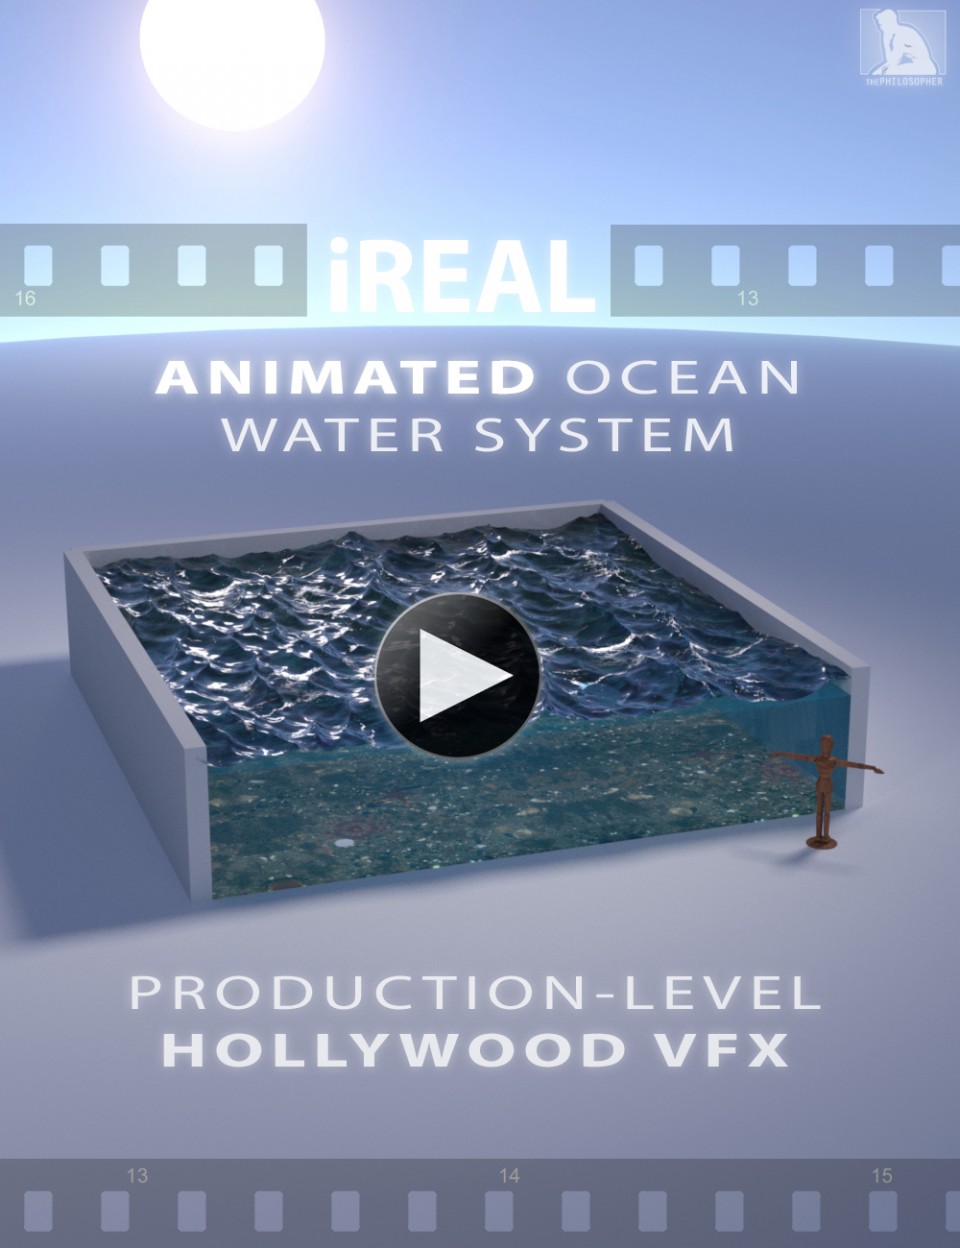 ireal-animated-ocean-water-system